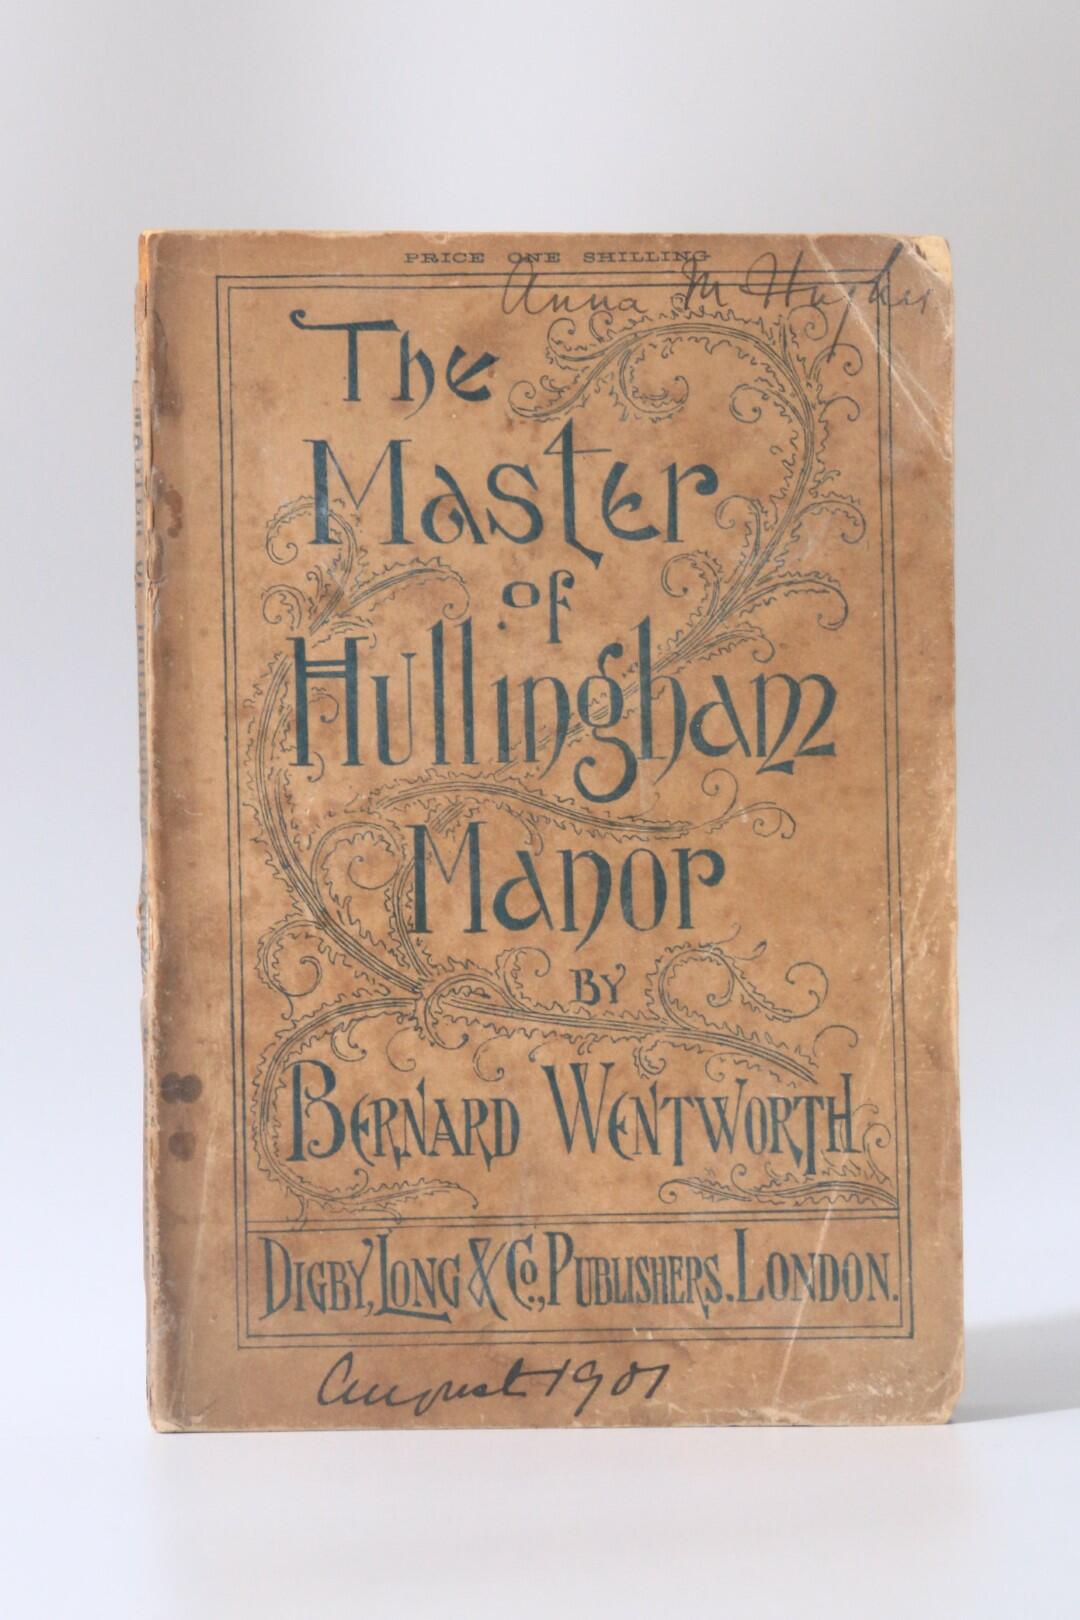 Bernard Wentworth [Eleanor Brotherton?] - The Master of Hullingham Manor - Digby, Long & Co., nd [1897], First Edition.